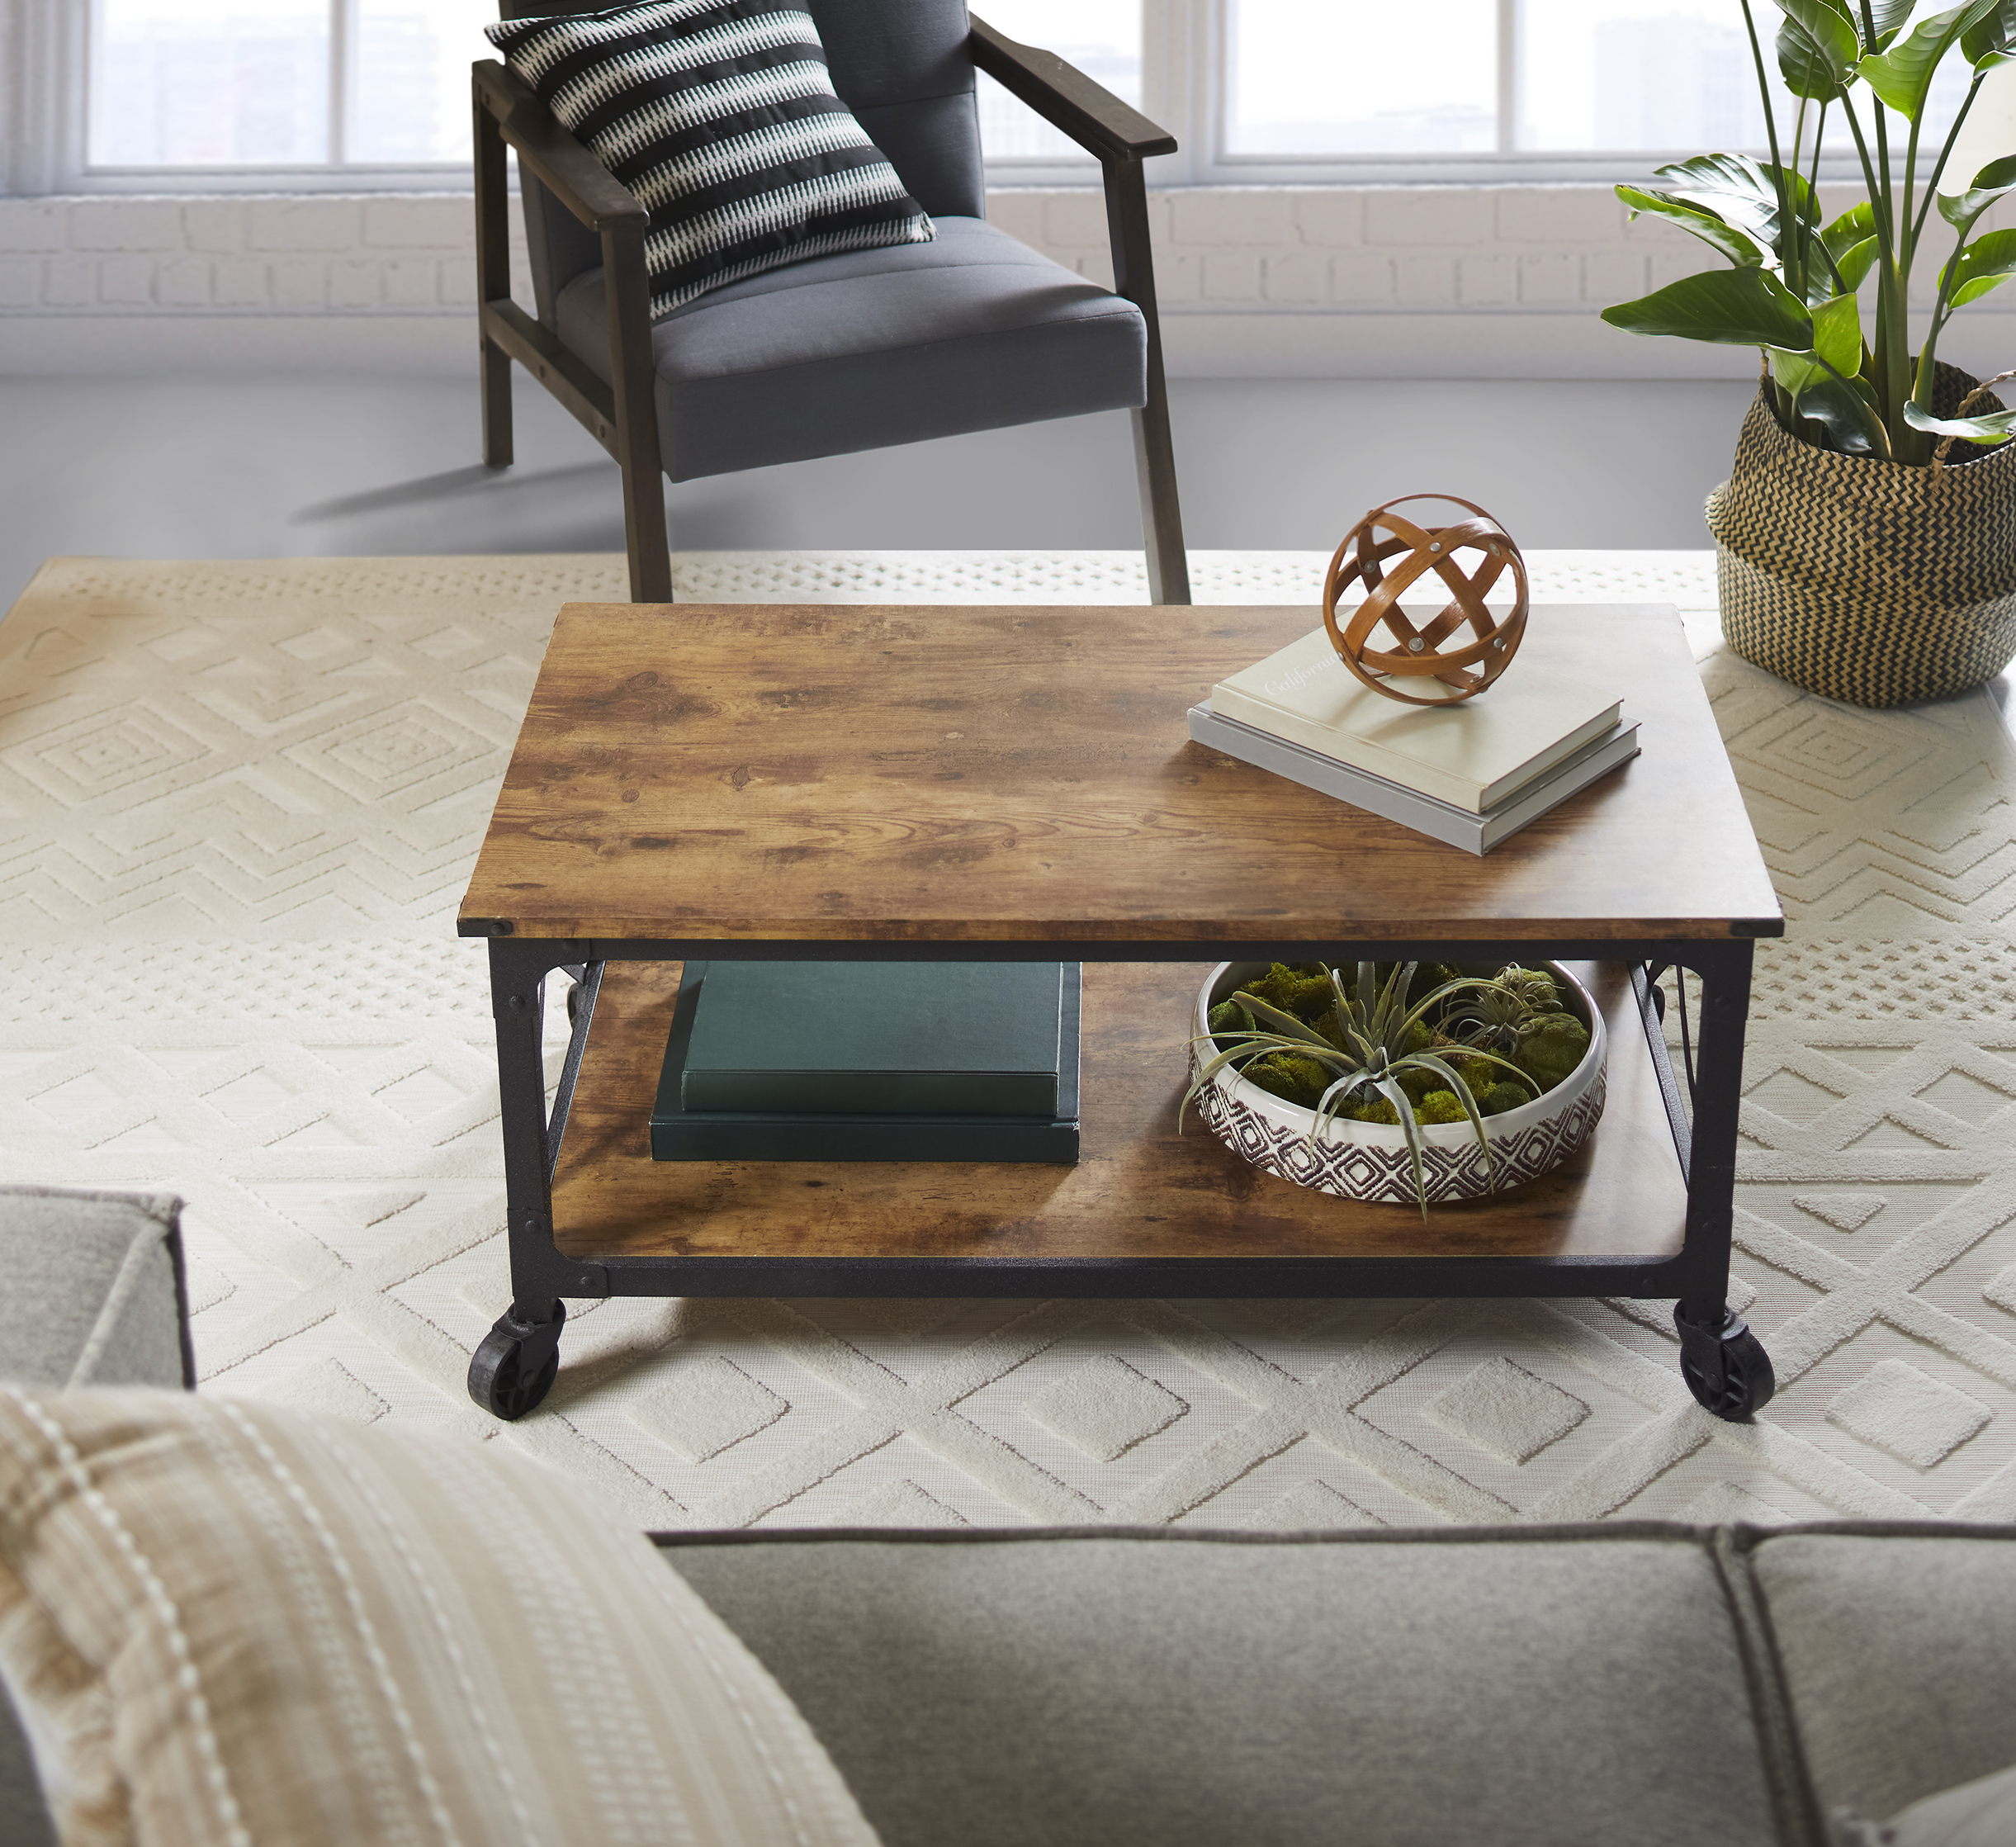 Better Homes & Gardens Rustic Country Coffee Table, Weathered Pine Finish - image 1 of 8